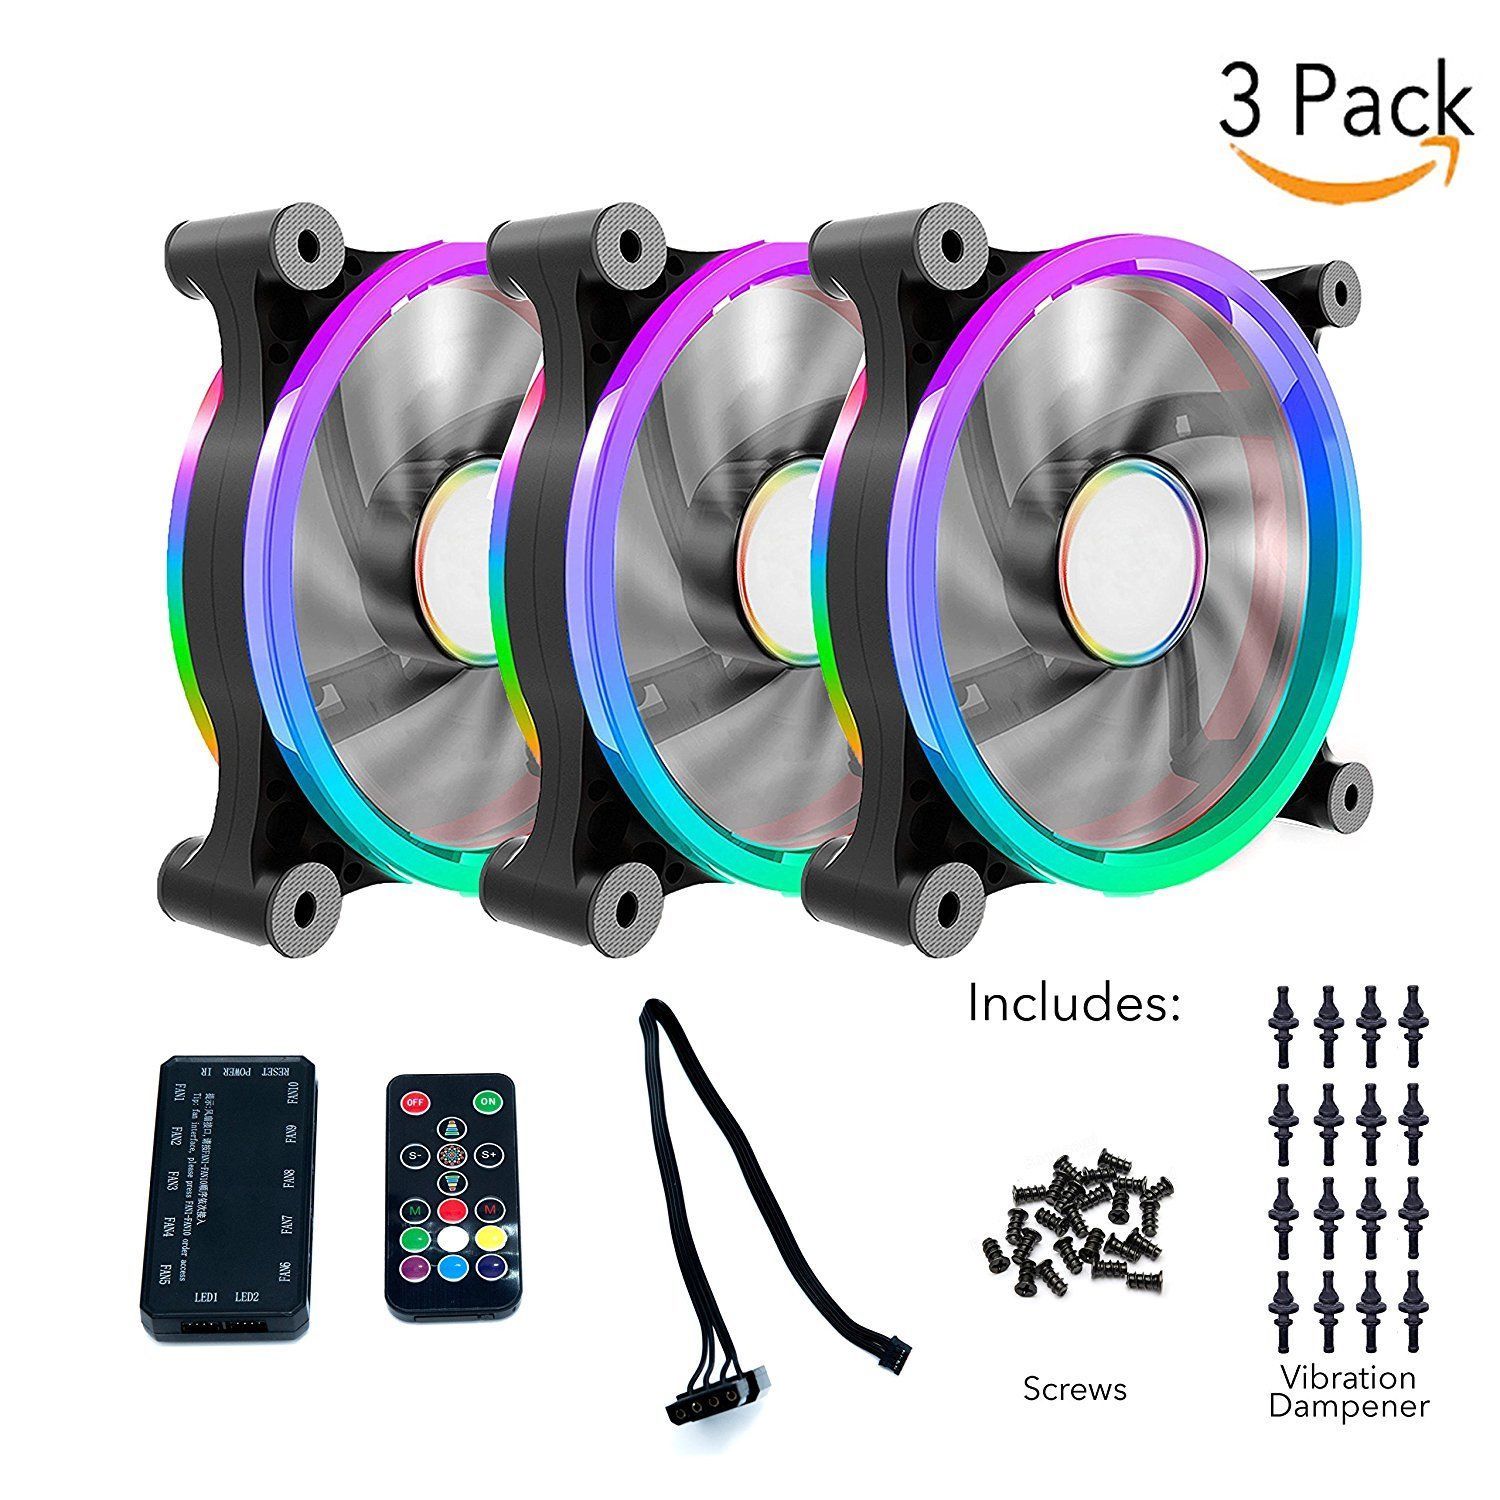 Clover Tale PS120M - 120mm, RGB w/ Controller - 3 Pack - Store 974 | ستور ٩٧٤